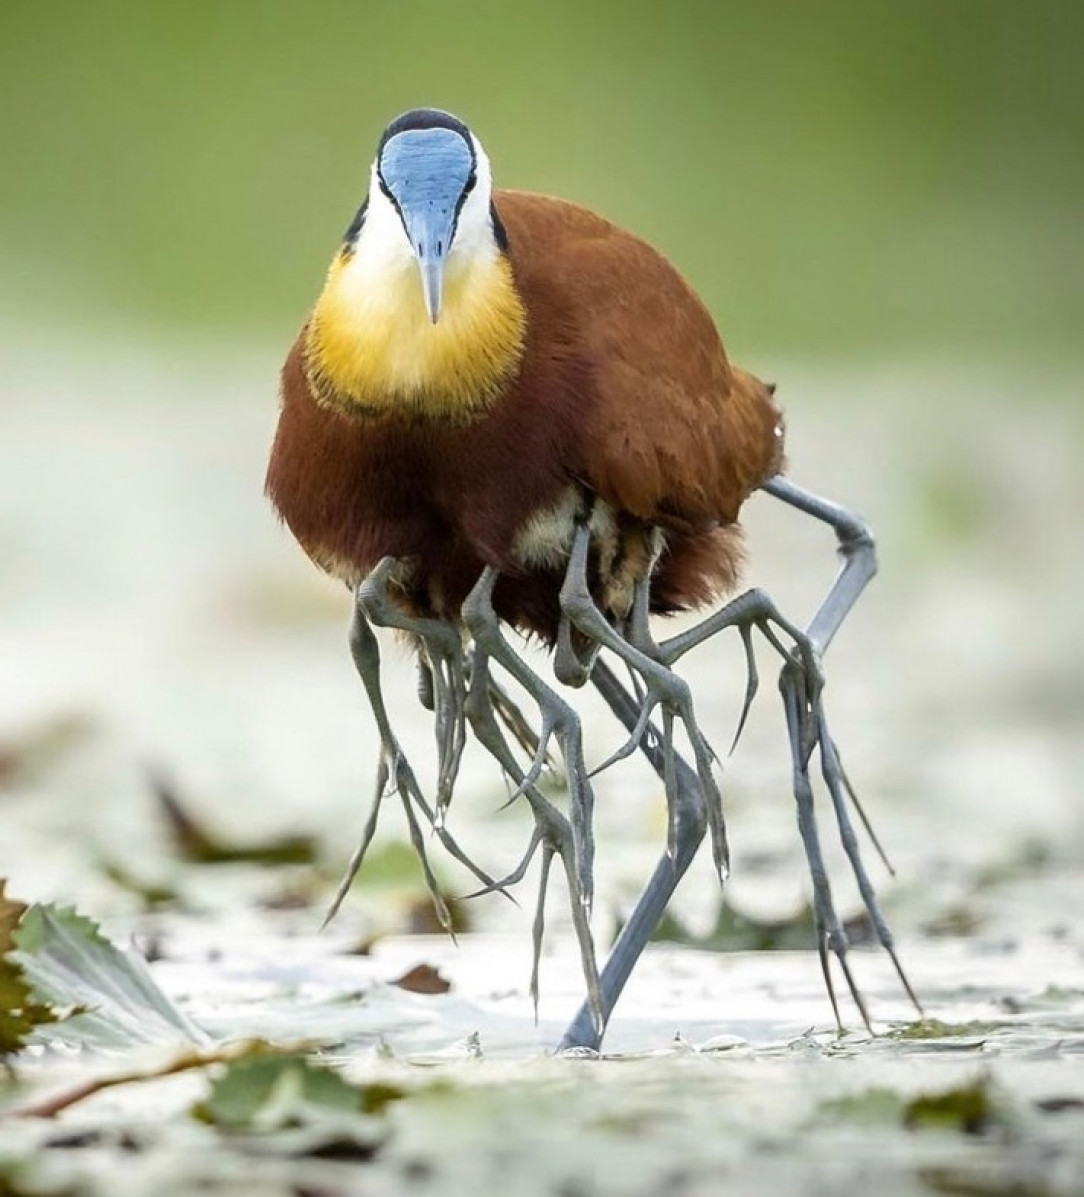 A Jacana carrying chicks underneath its wings